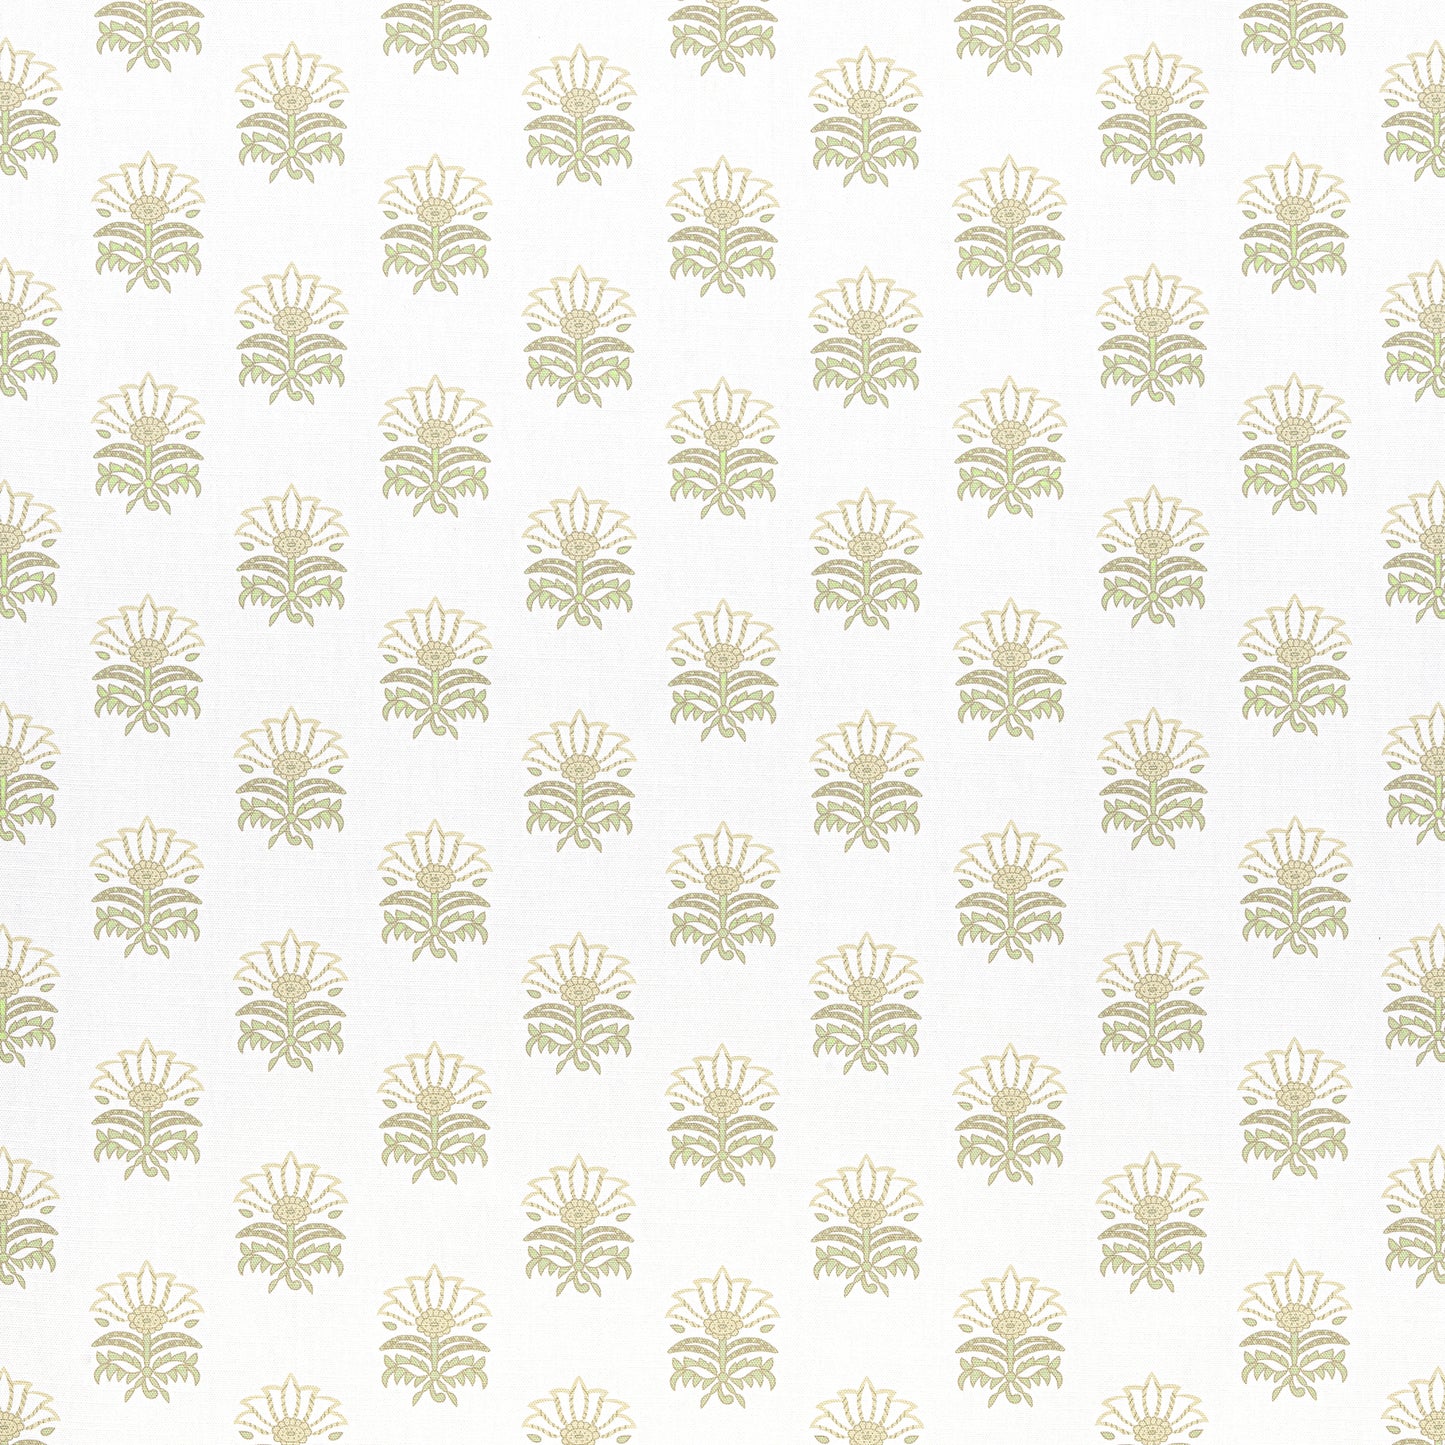 Purchase  Ann French Fabric Product AF15158  pattern name  Milford